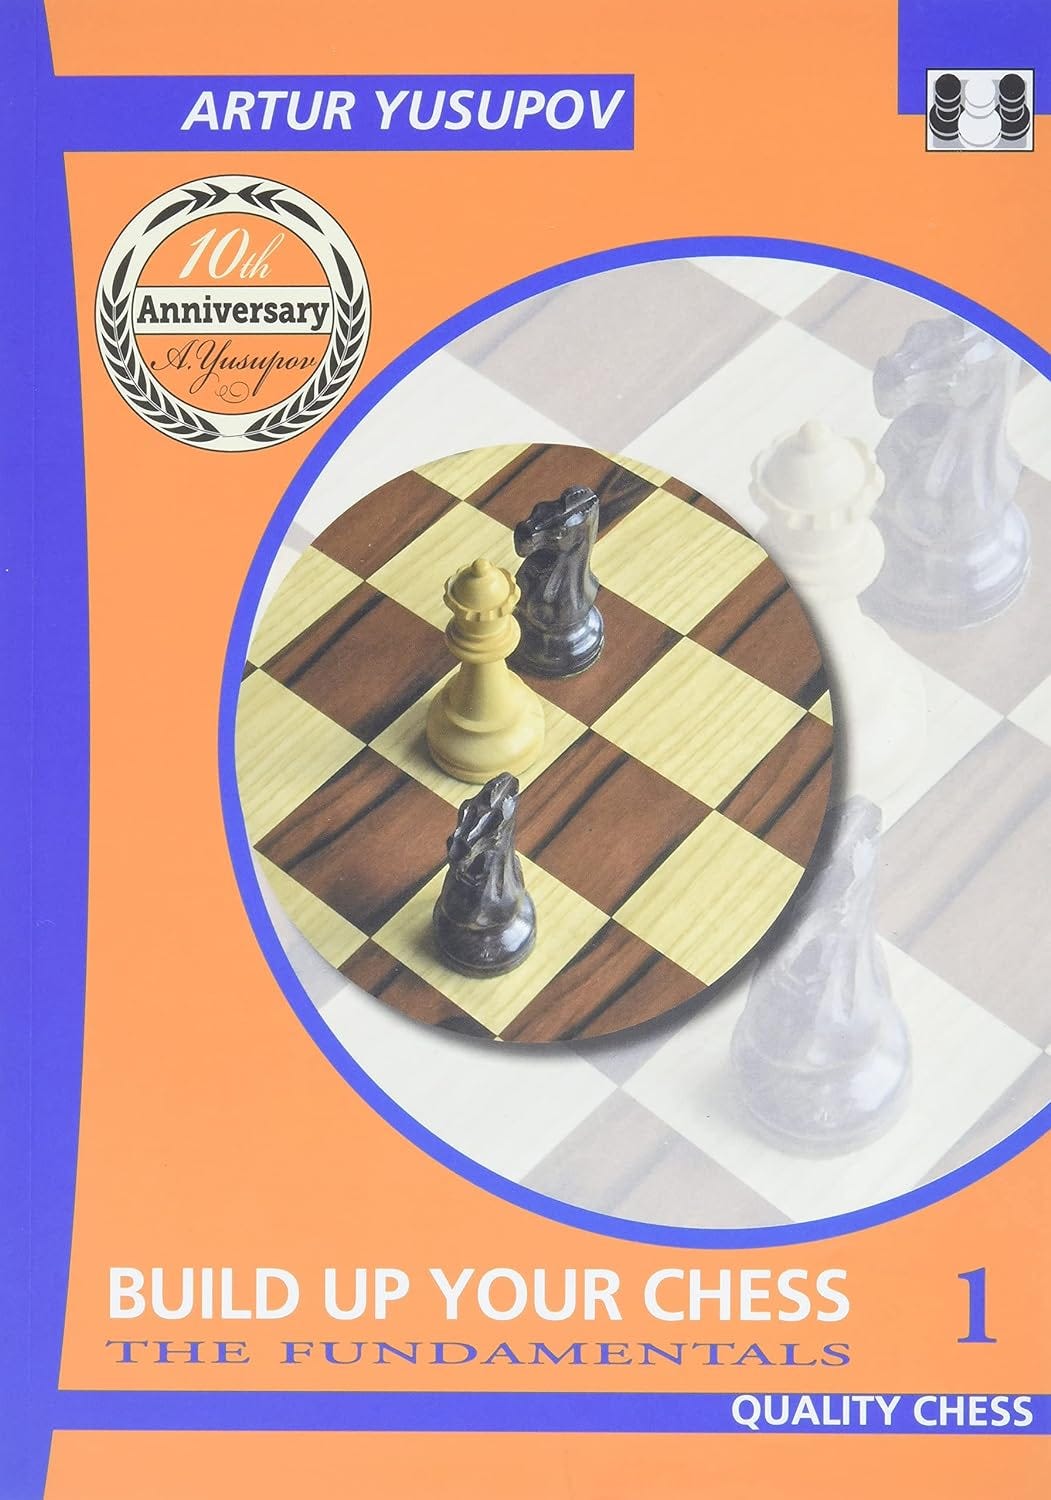 Do You Google Your Chess Knowledge? - by Martin B. Justesen